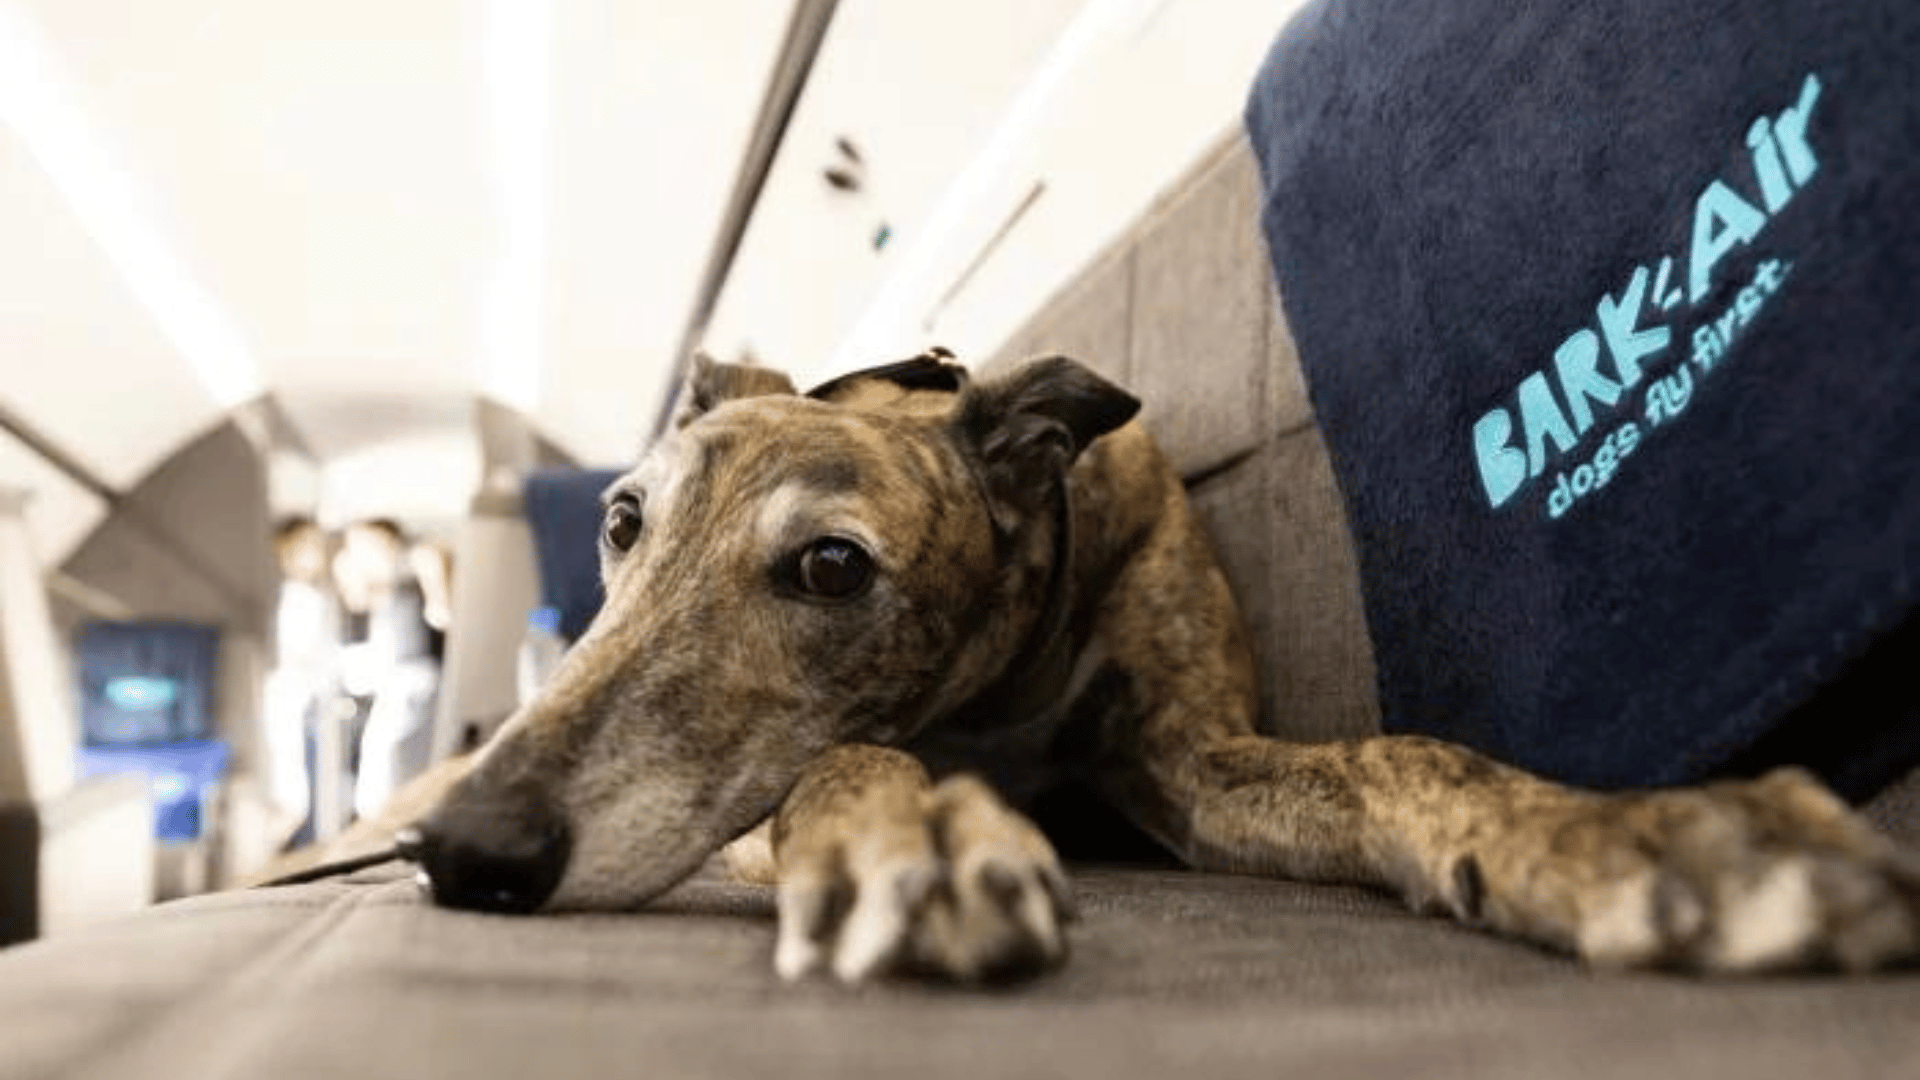 BARK Air completed its first flight from New York to Los Angeles Joe Gall:BARK